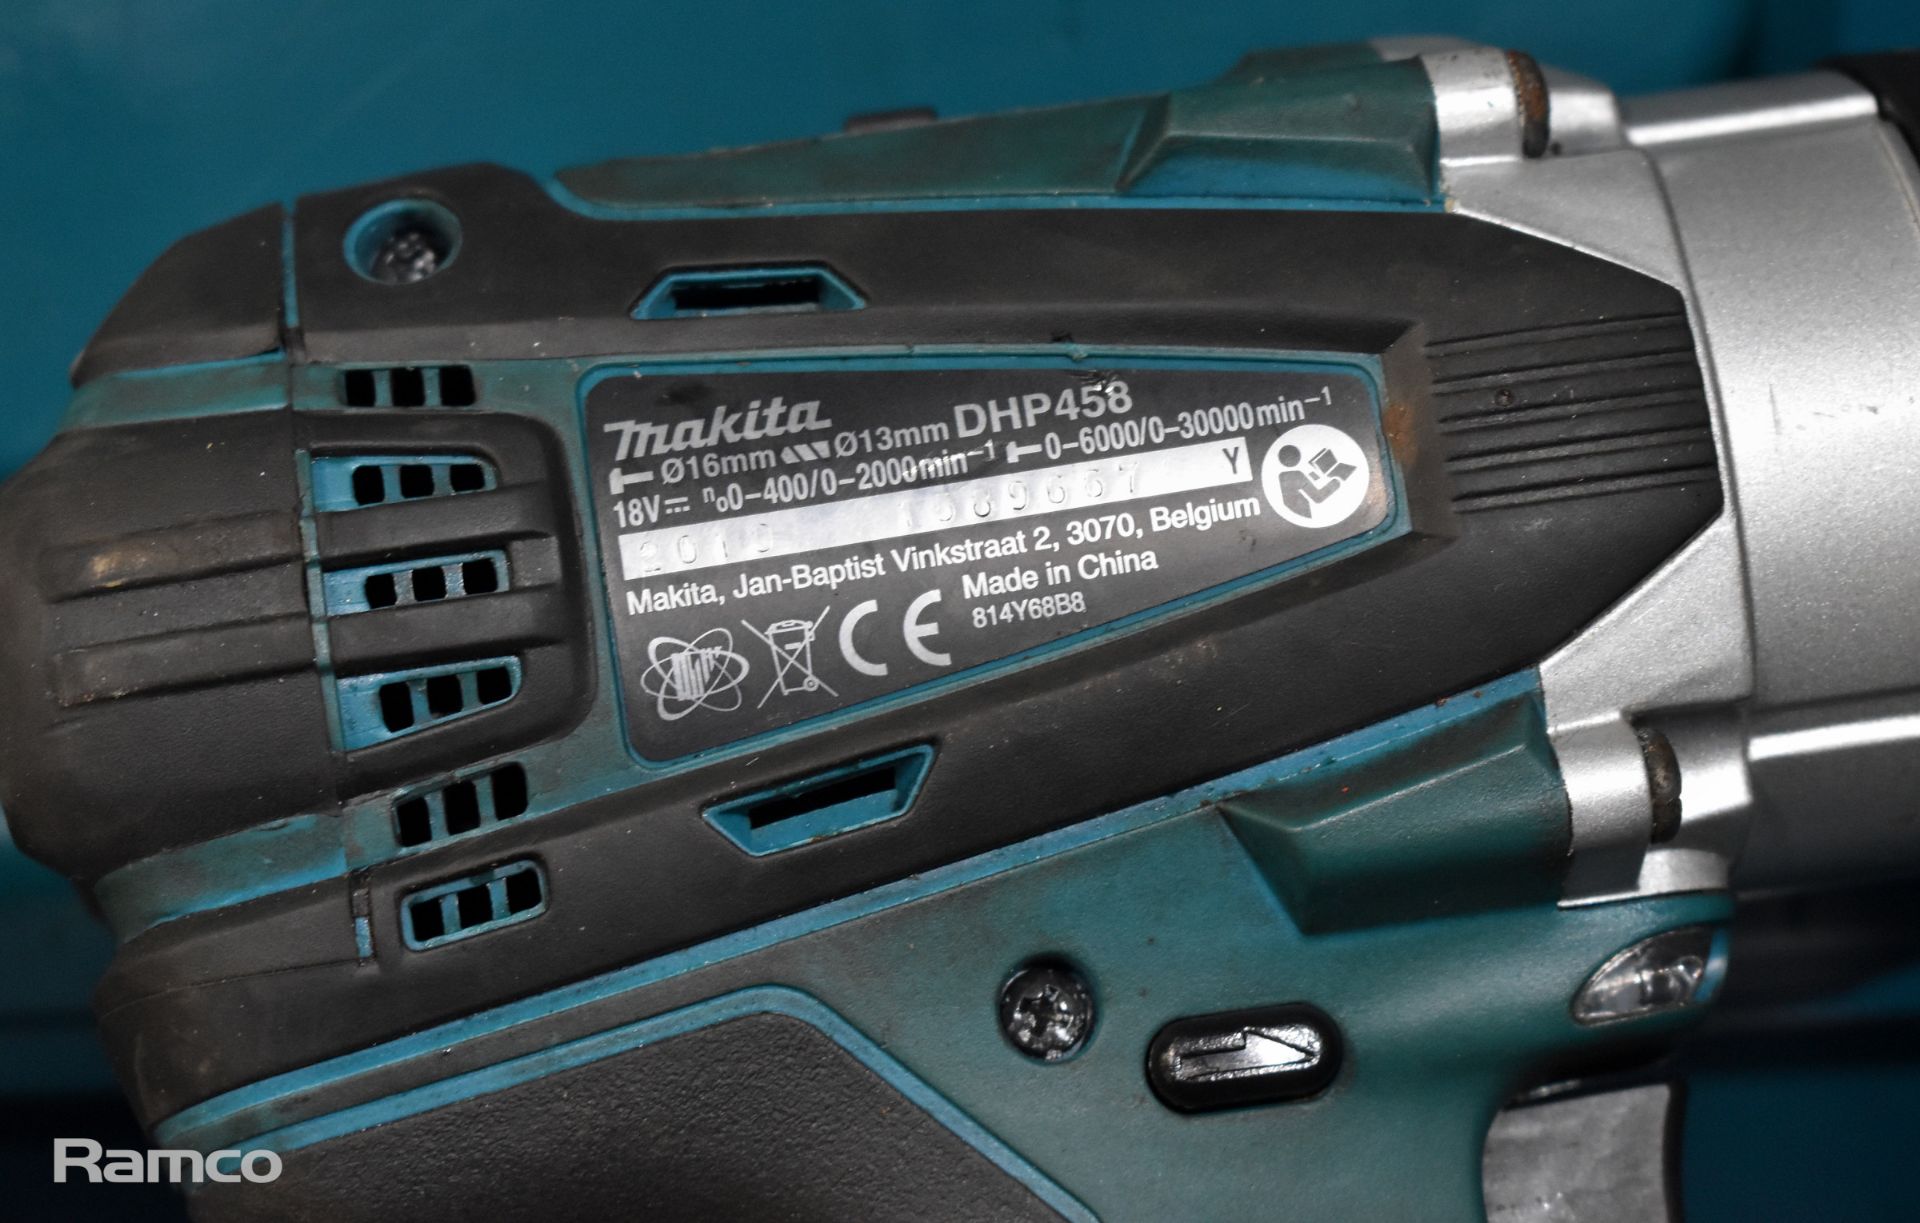 Makita DHP458 cordless drill with DC18RC battery charger, drill handle and storage case - Image 3 of 6